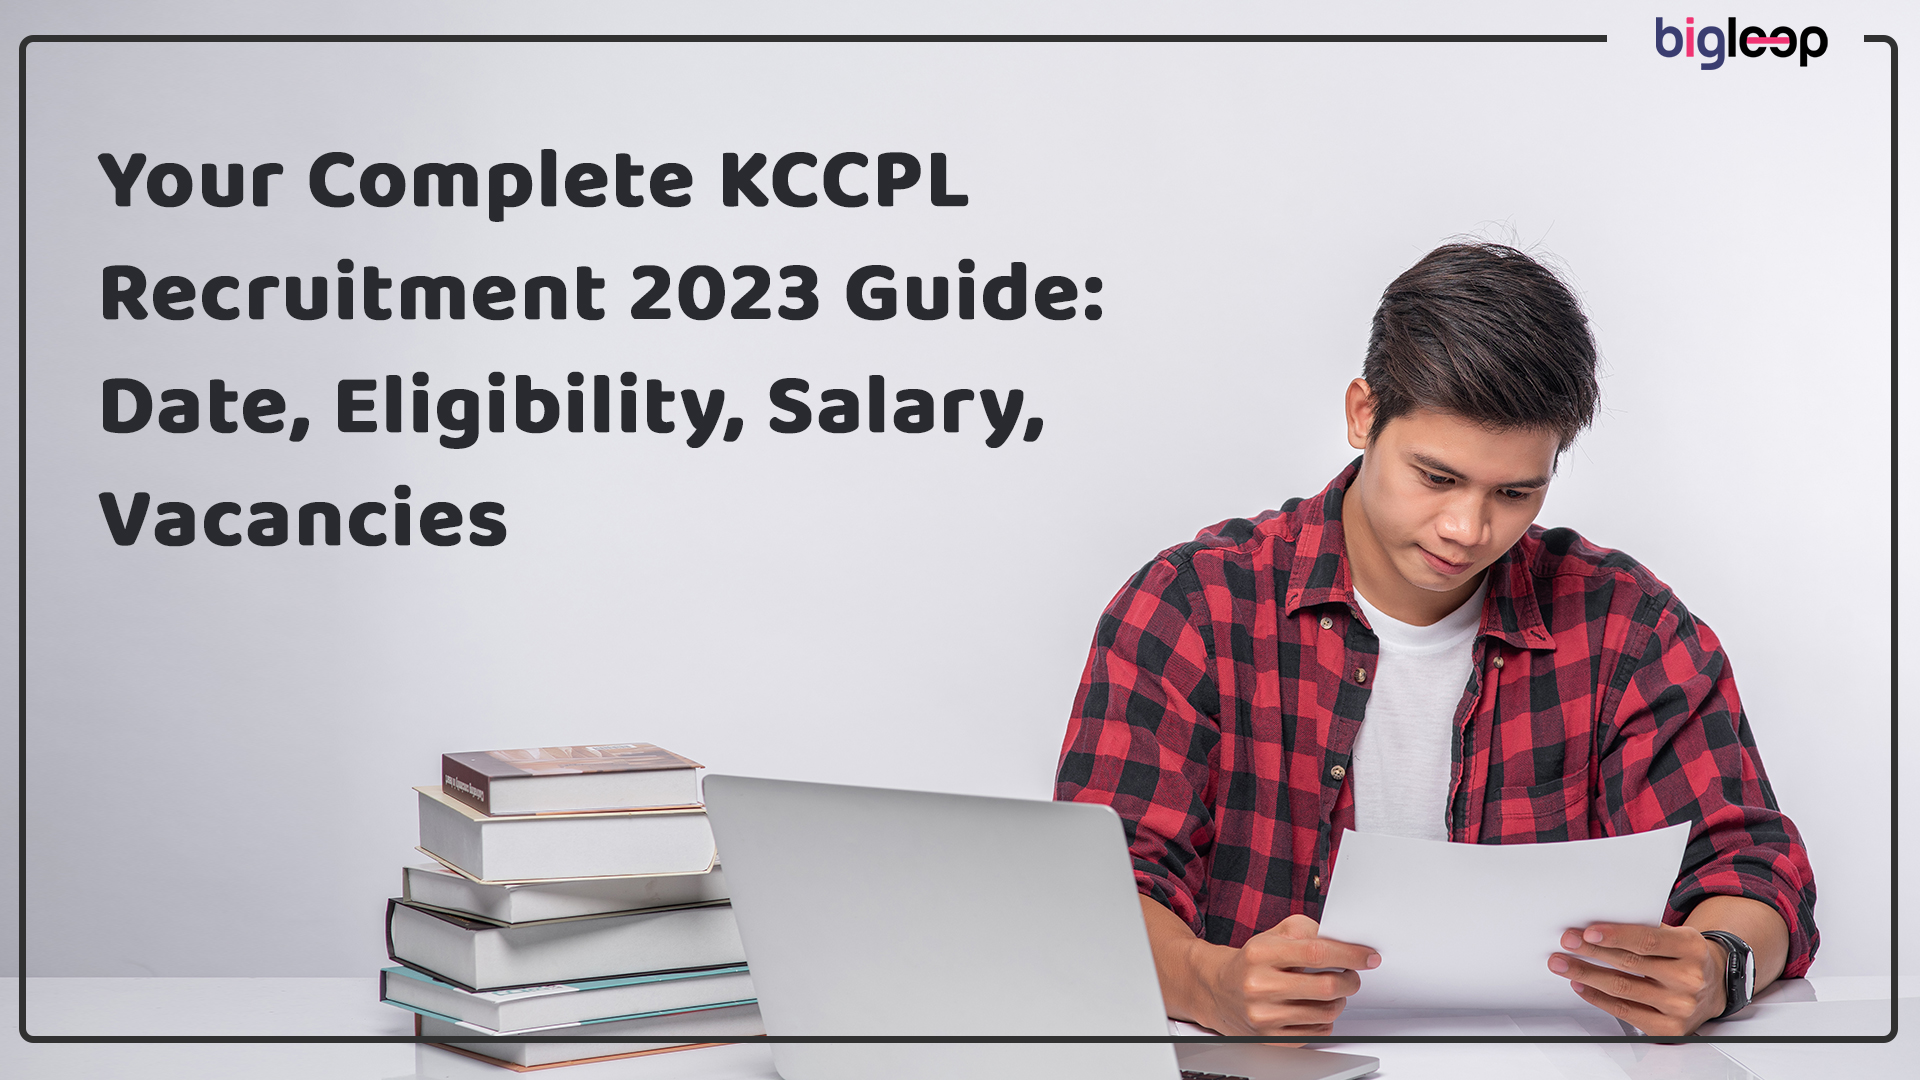 Your Complete KCCPL Recruitment 2023 Guide: Date, Eligibility, Salary, Vacancies